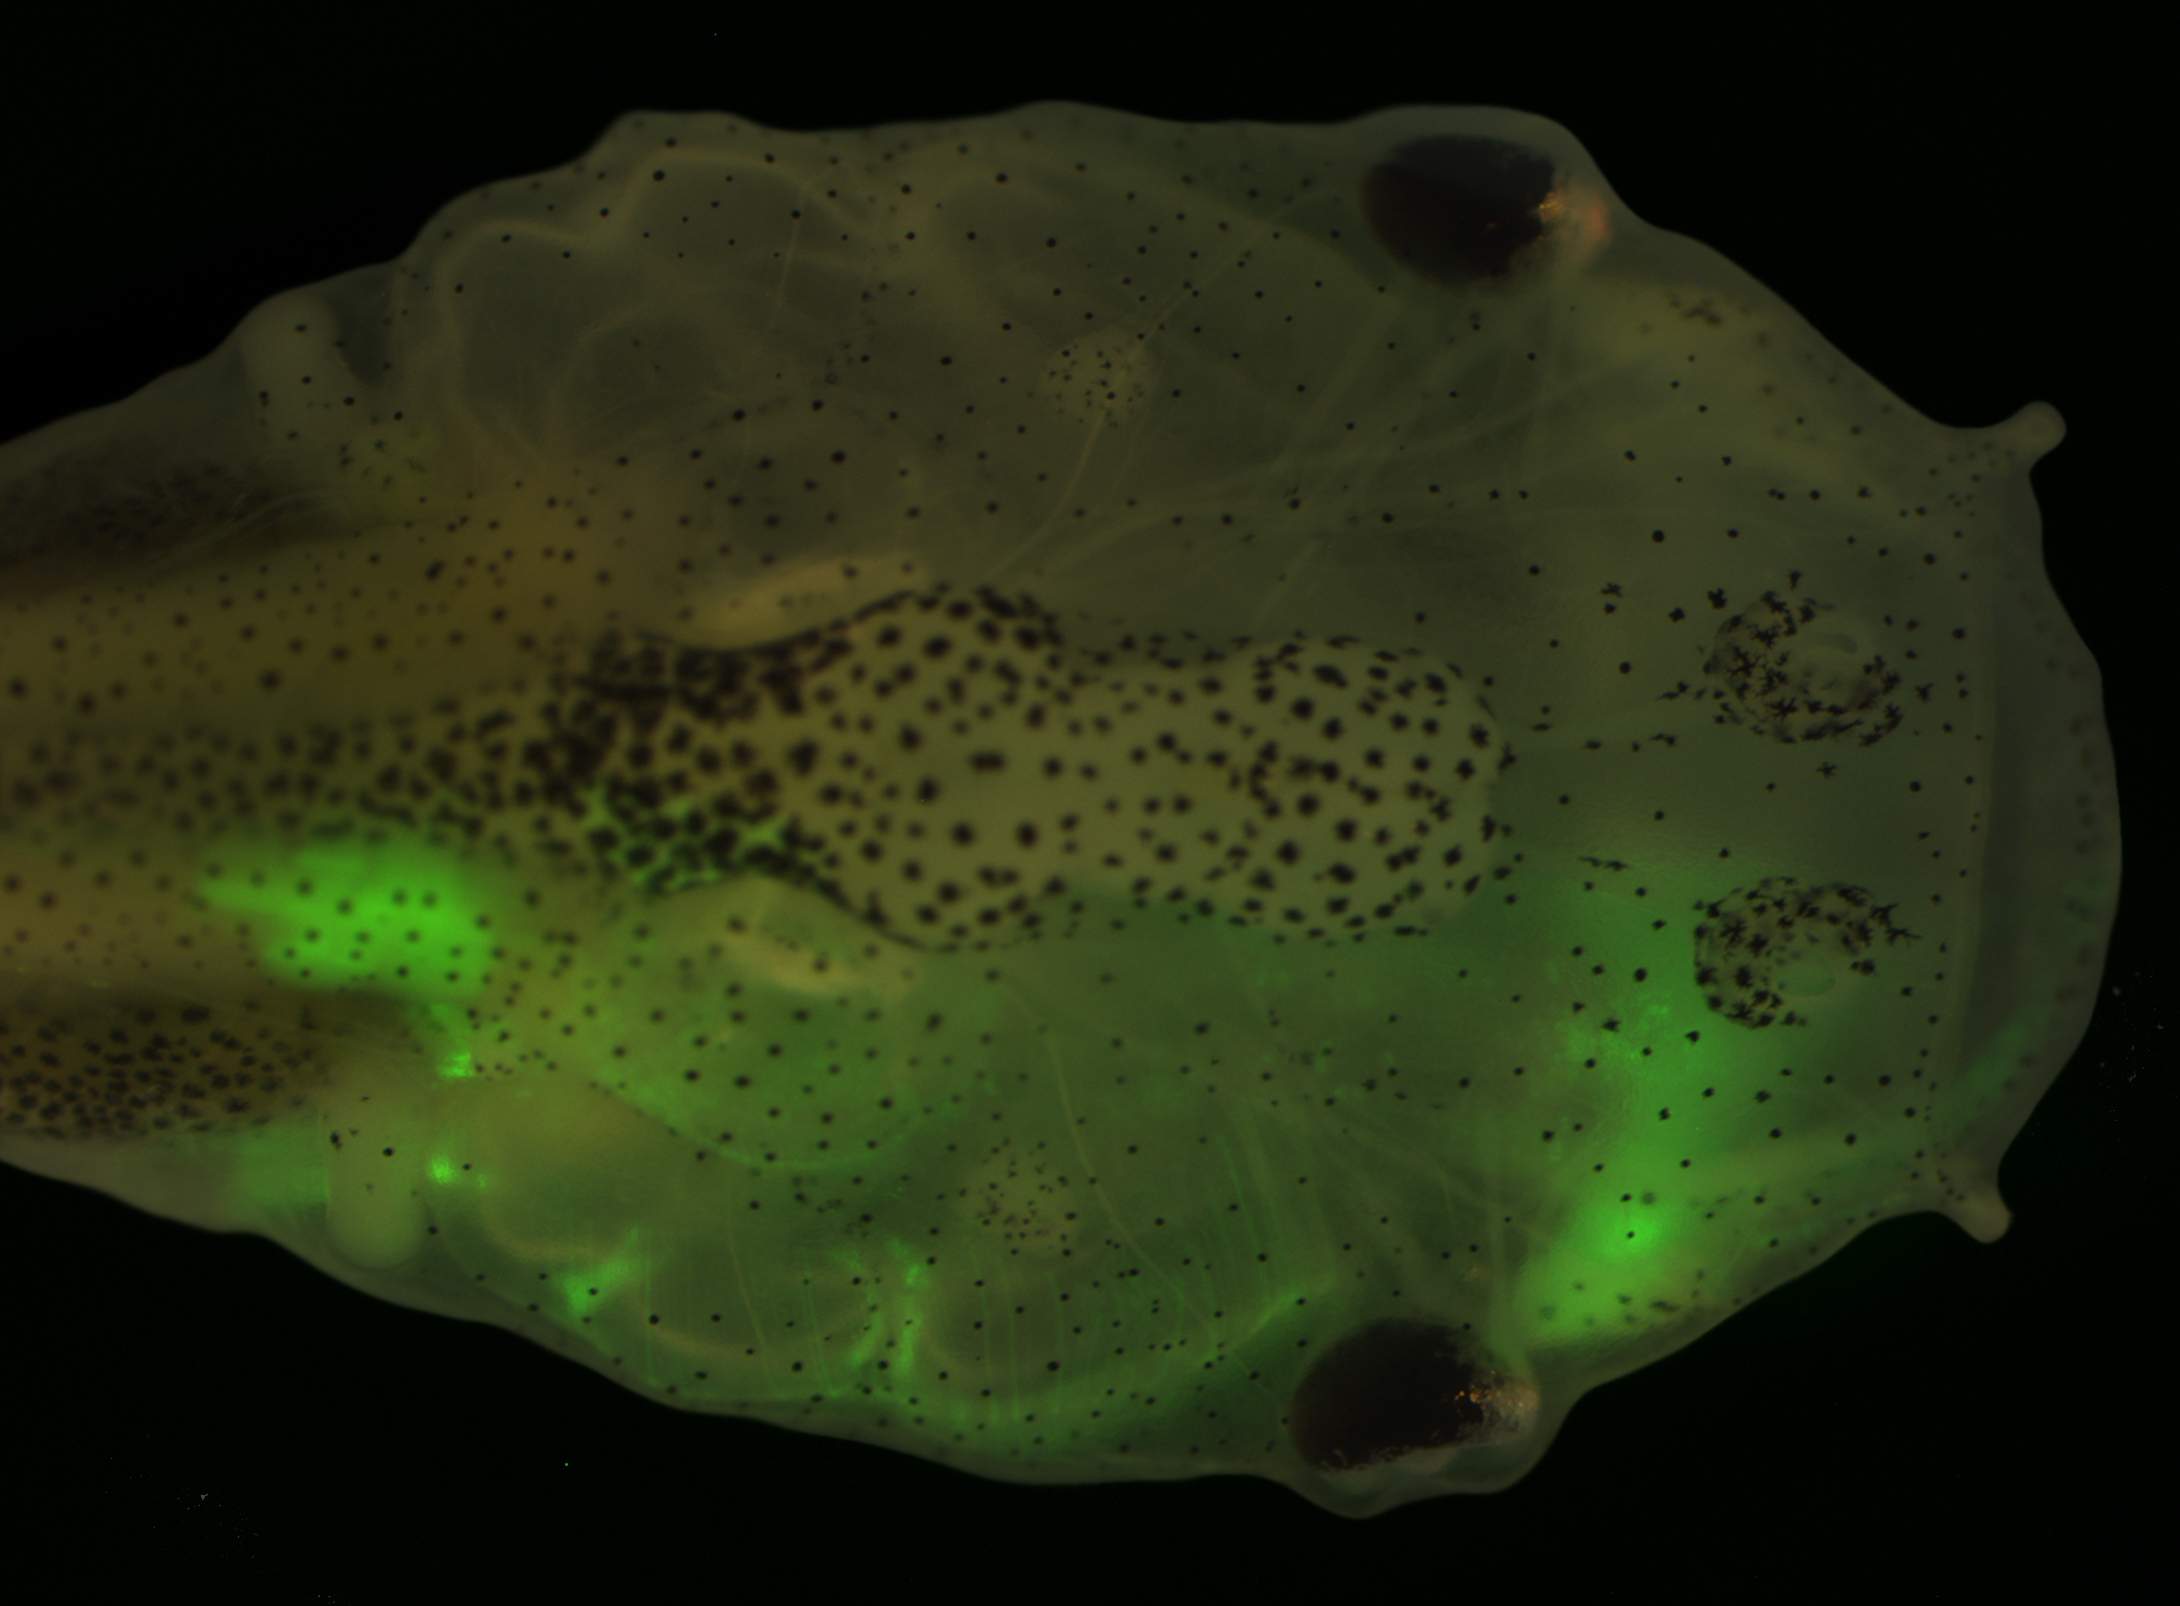 Labelling the embryonic neural crest in frogs: As an embryo, this tadpole received a neural crest tissue graft on its right side from a Green Fluorescent Protein transgenic donor embryo. As a result, the neural crest-derived structures, such as the jaws, 